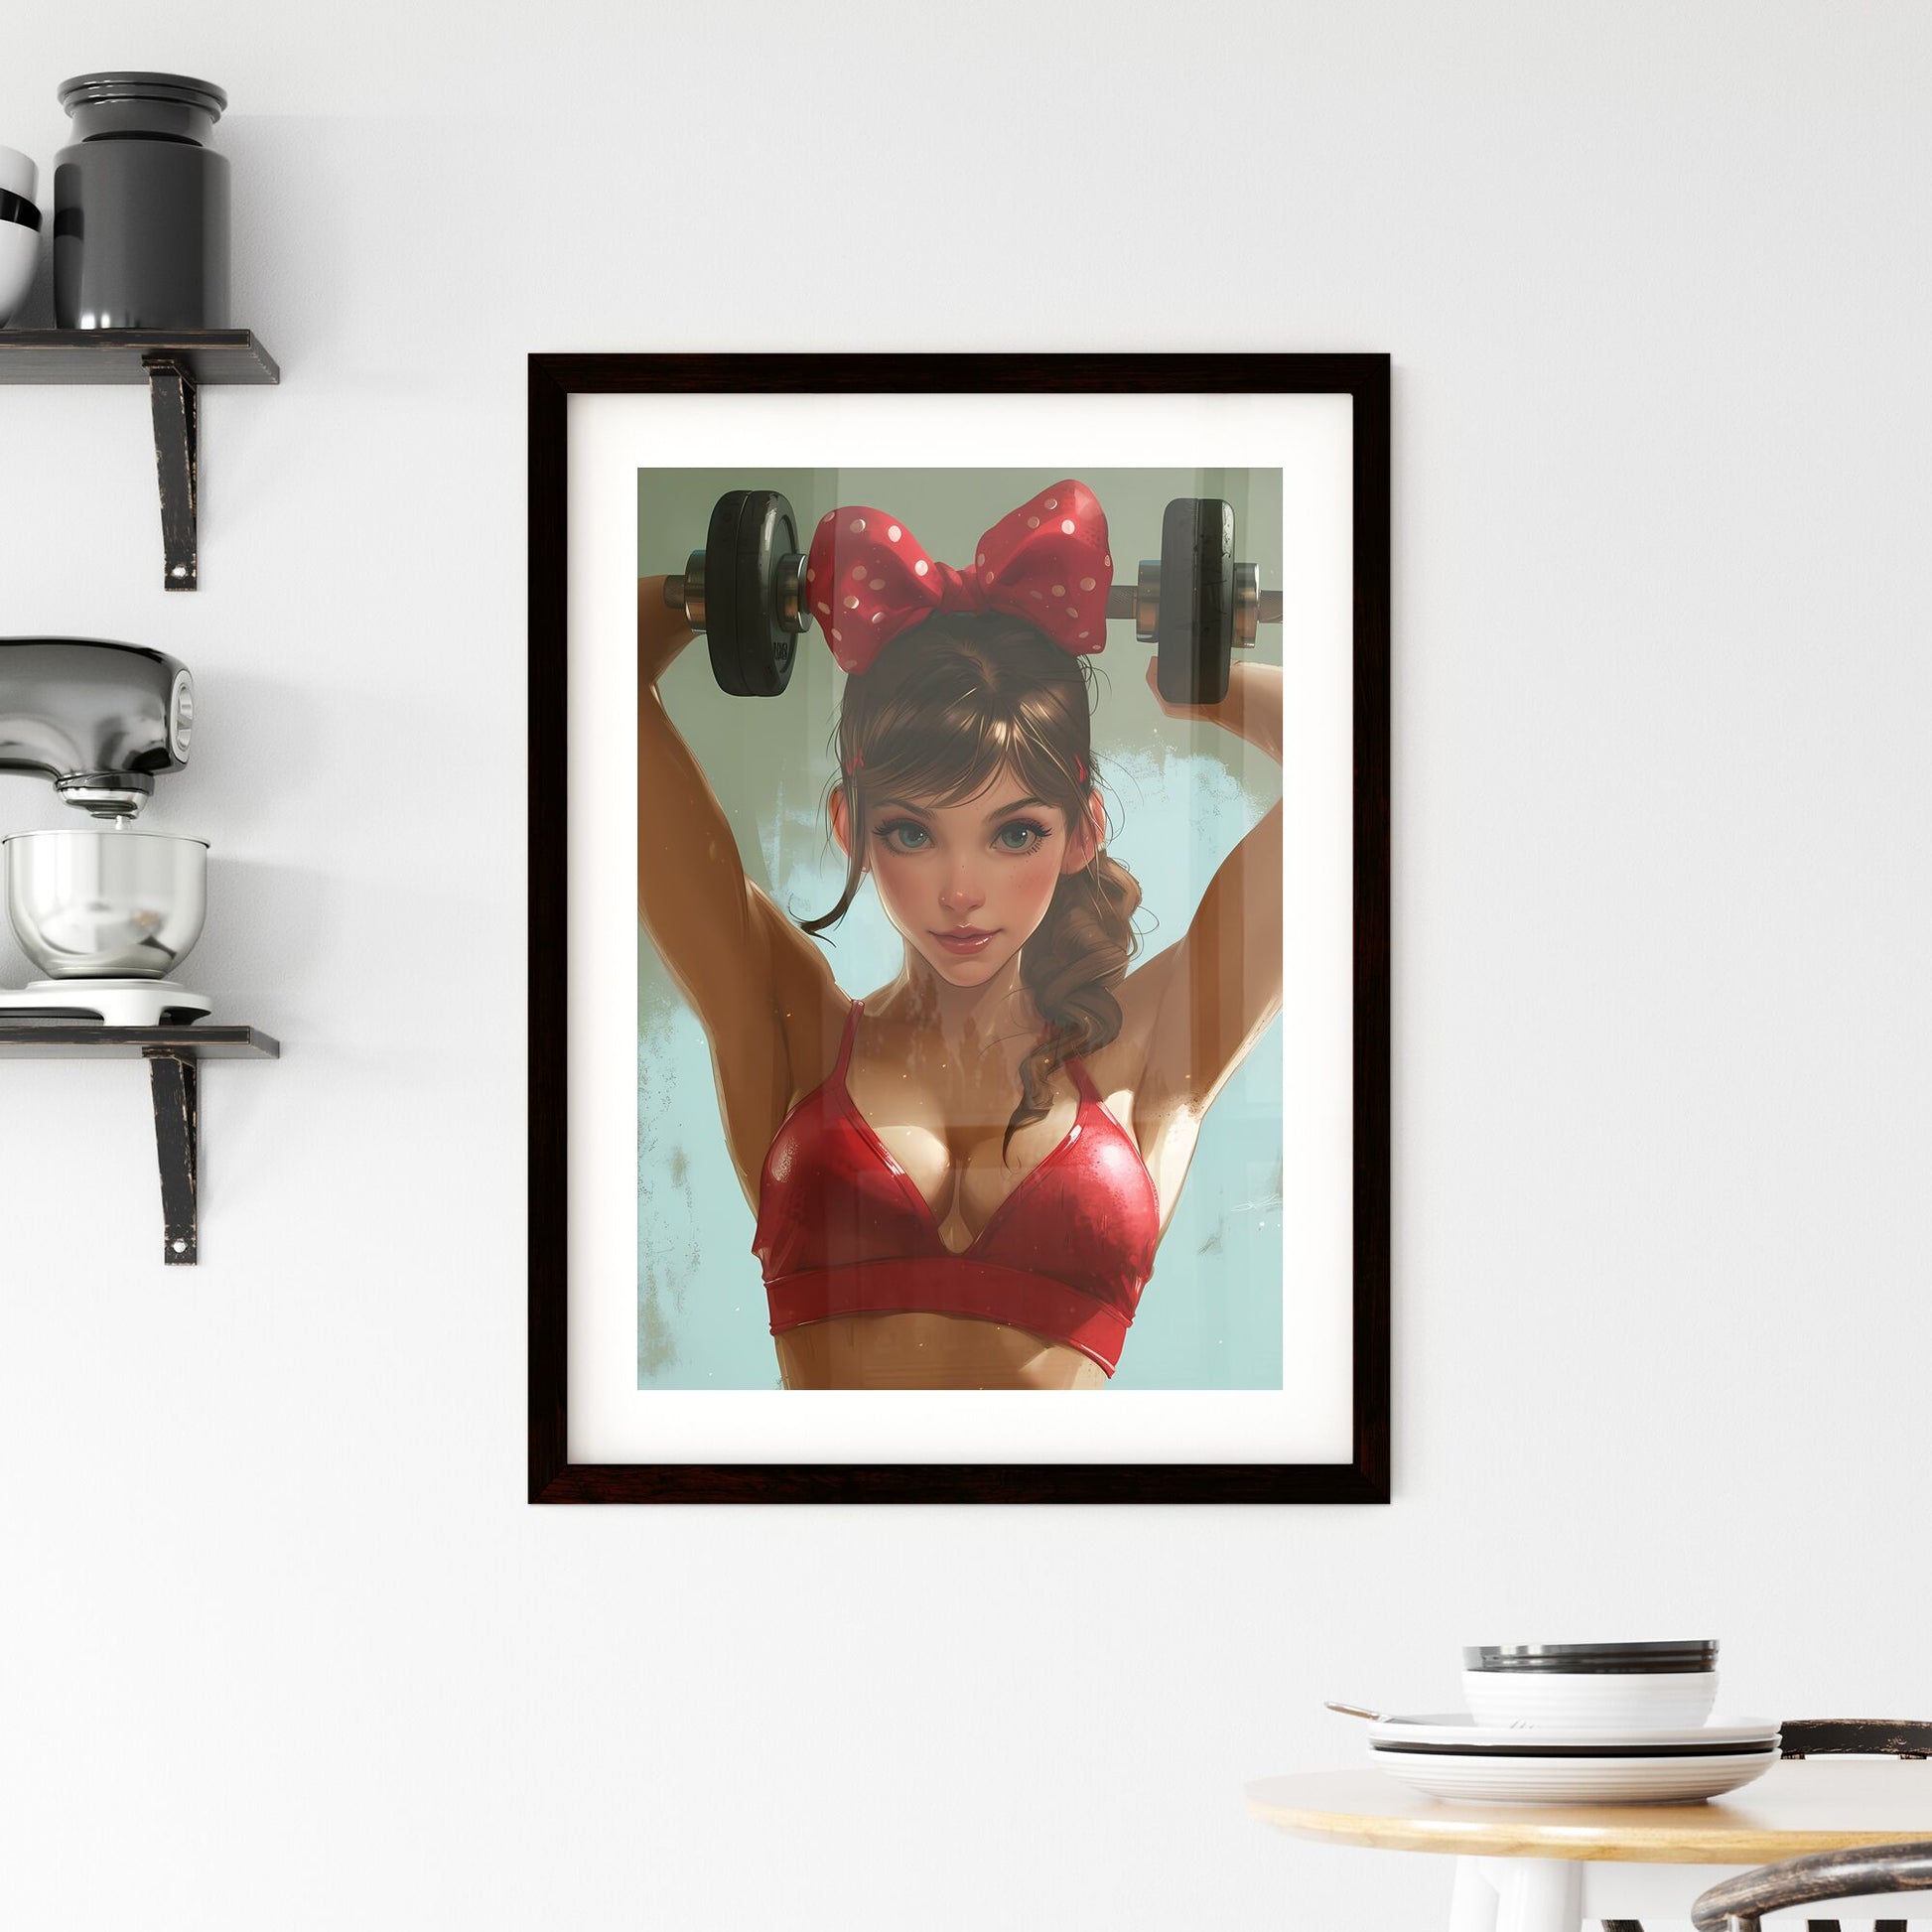 American pin up, pin up girls, attractive, gym, lifting weight - Art print of a woman lifting weights with a bow on her head Default Title